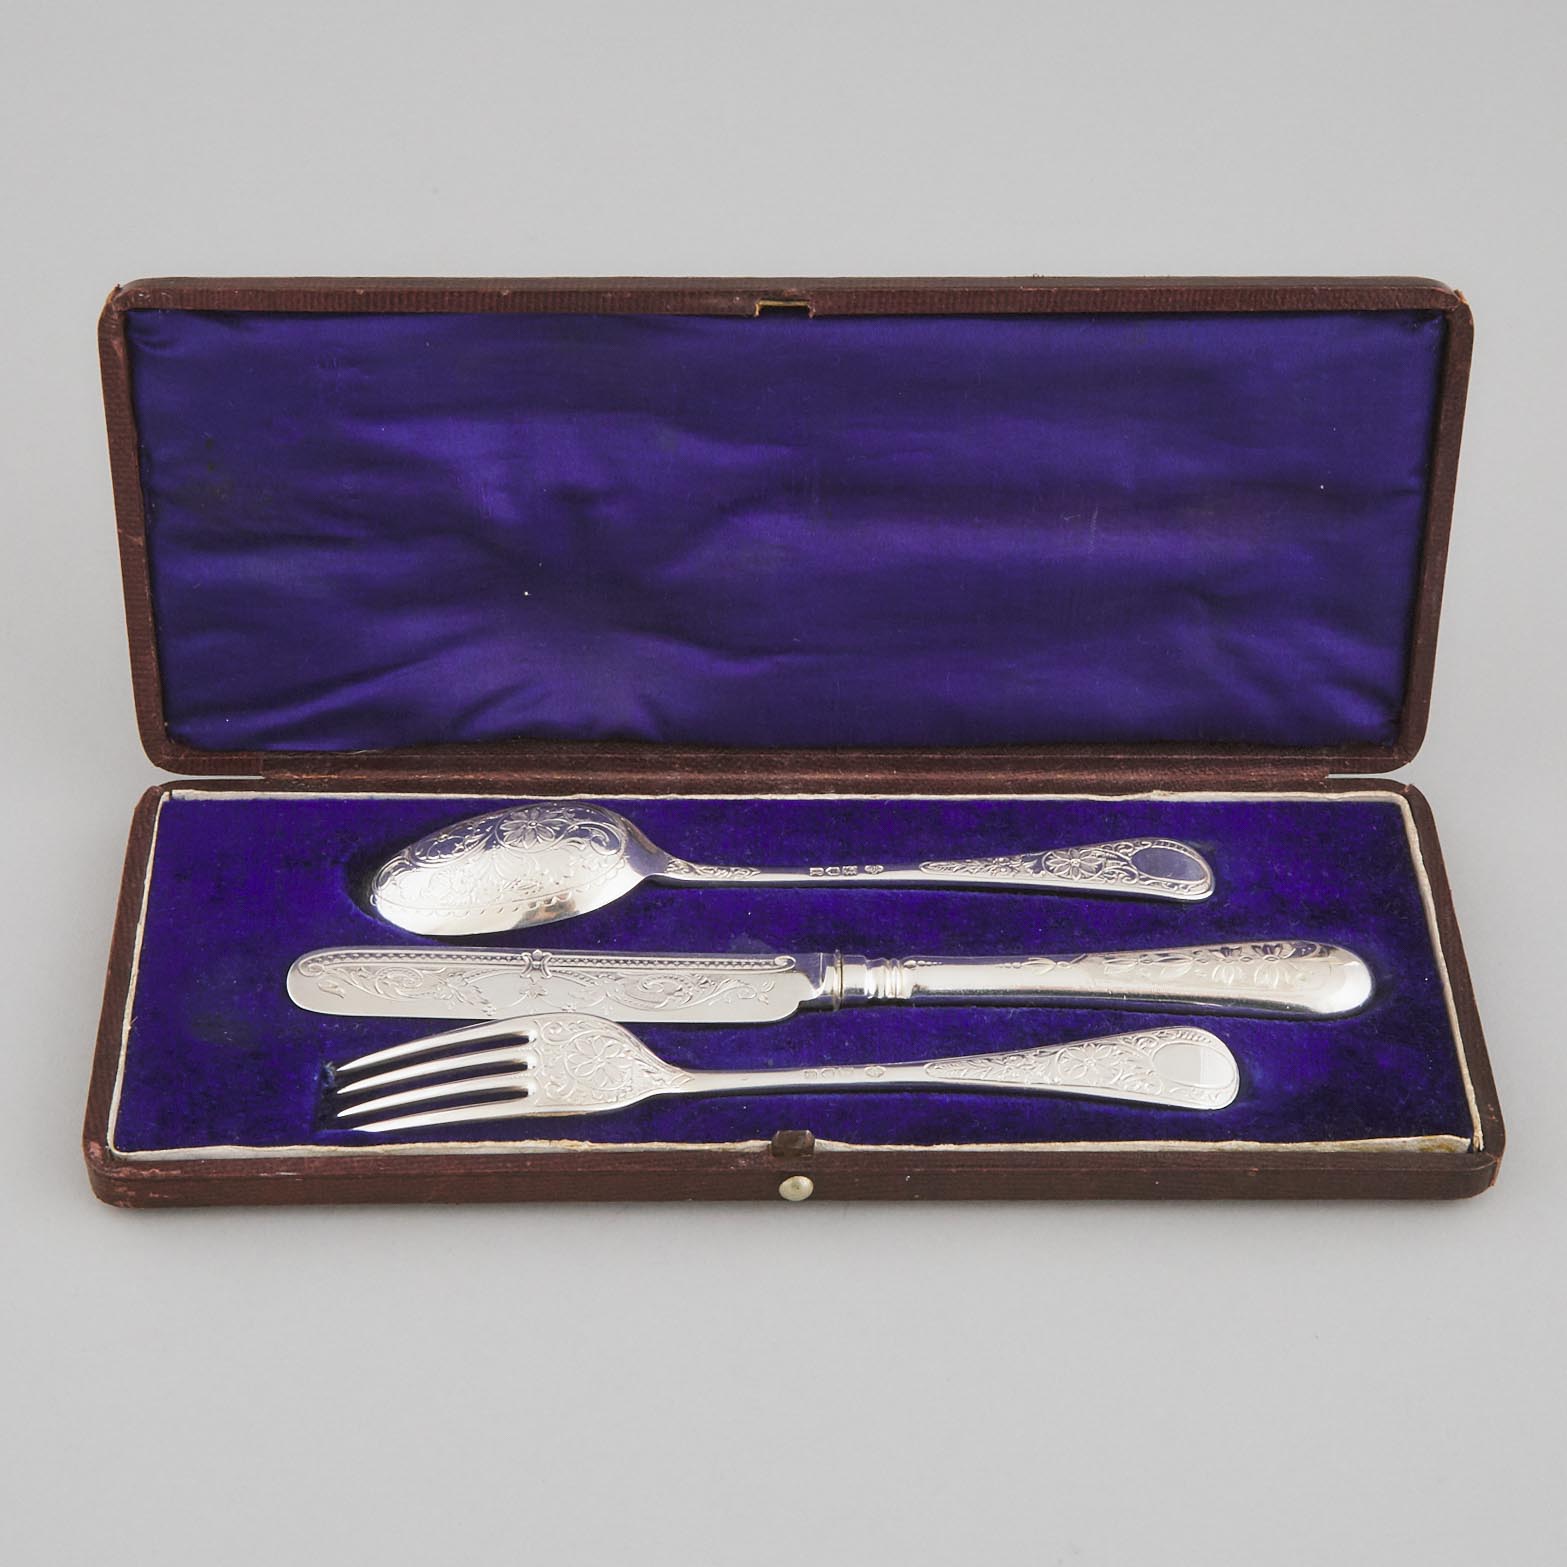 Edwardian Silver Child's Fork and